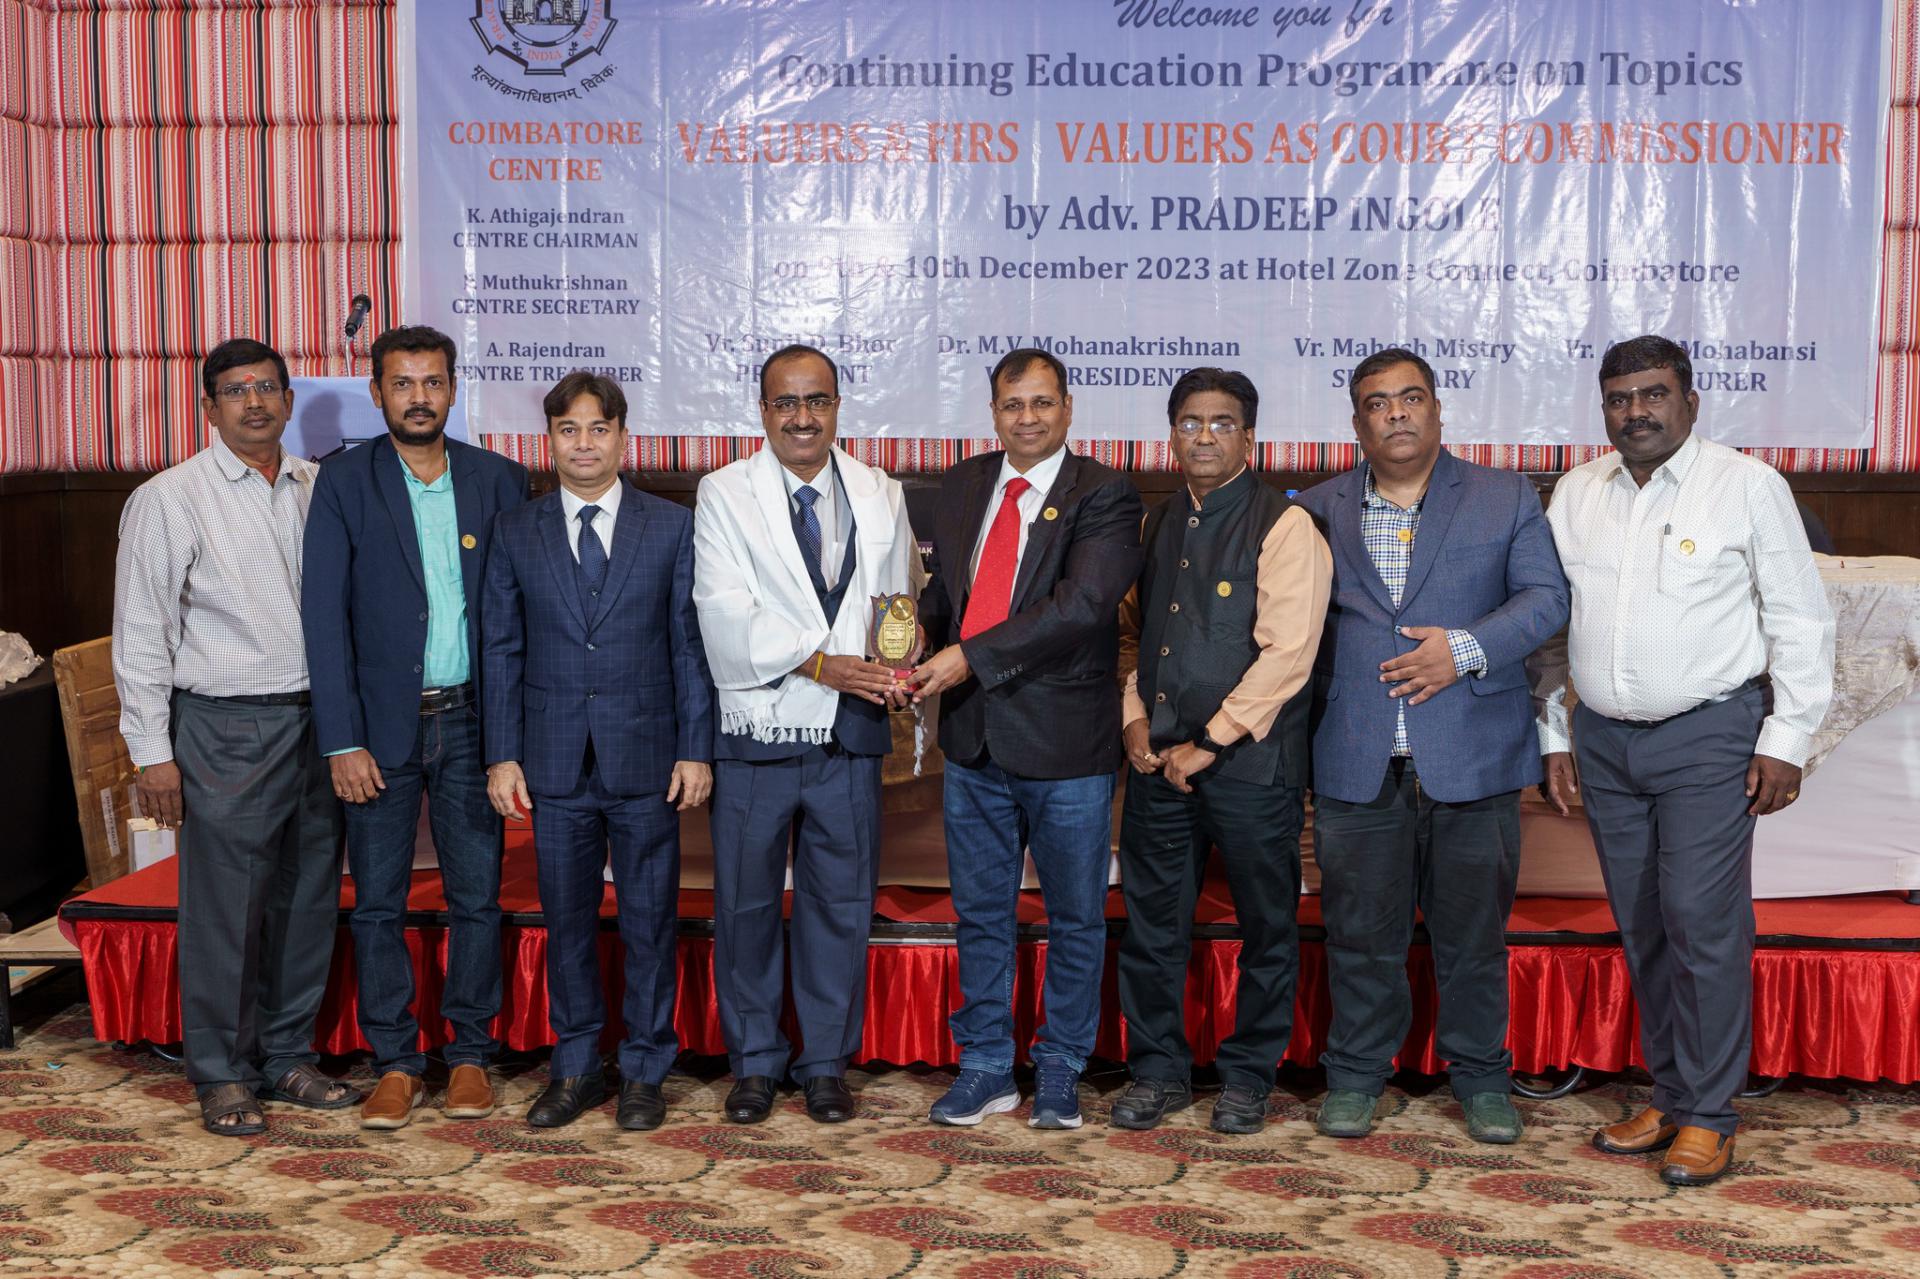 National Continuing Education Program (CEP) organized on 9th & 10th December 2023